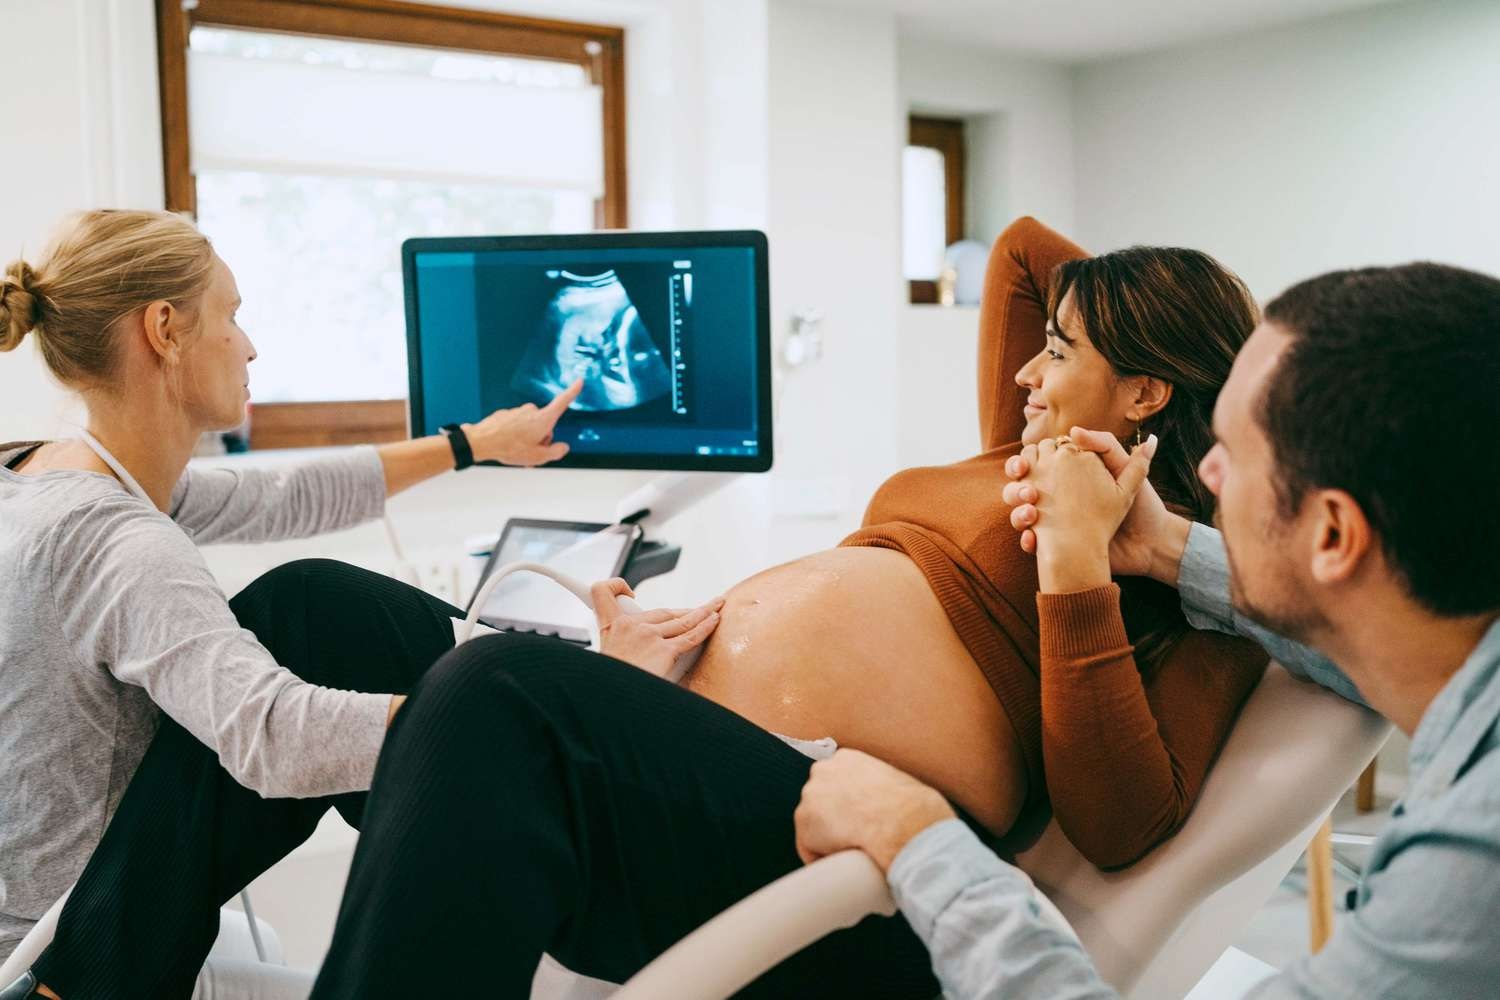 Prenatal Diagnosis: What Is The Purpose Of Ultrasound For Pregnancy?